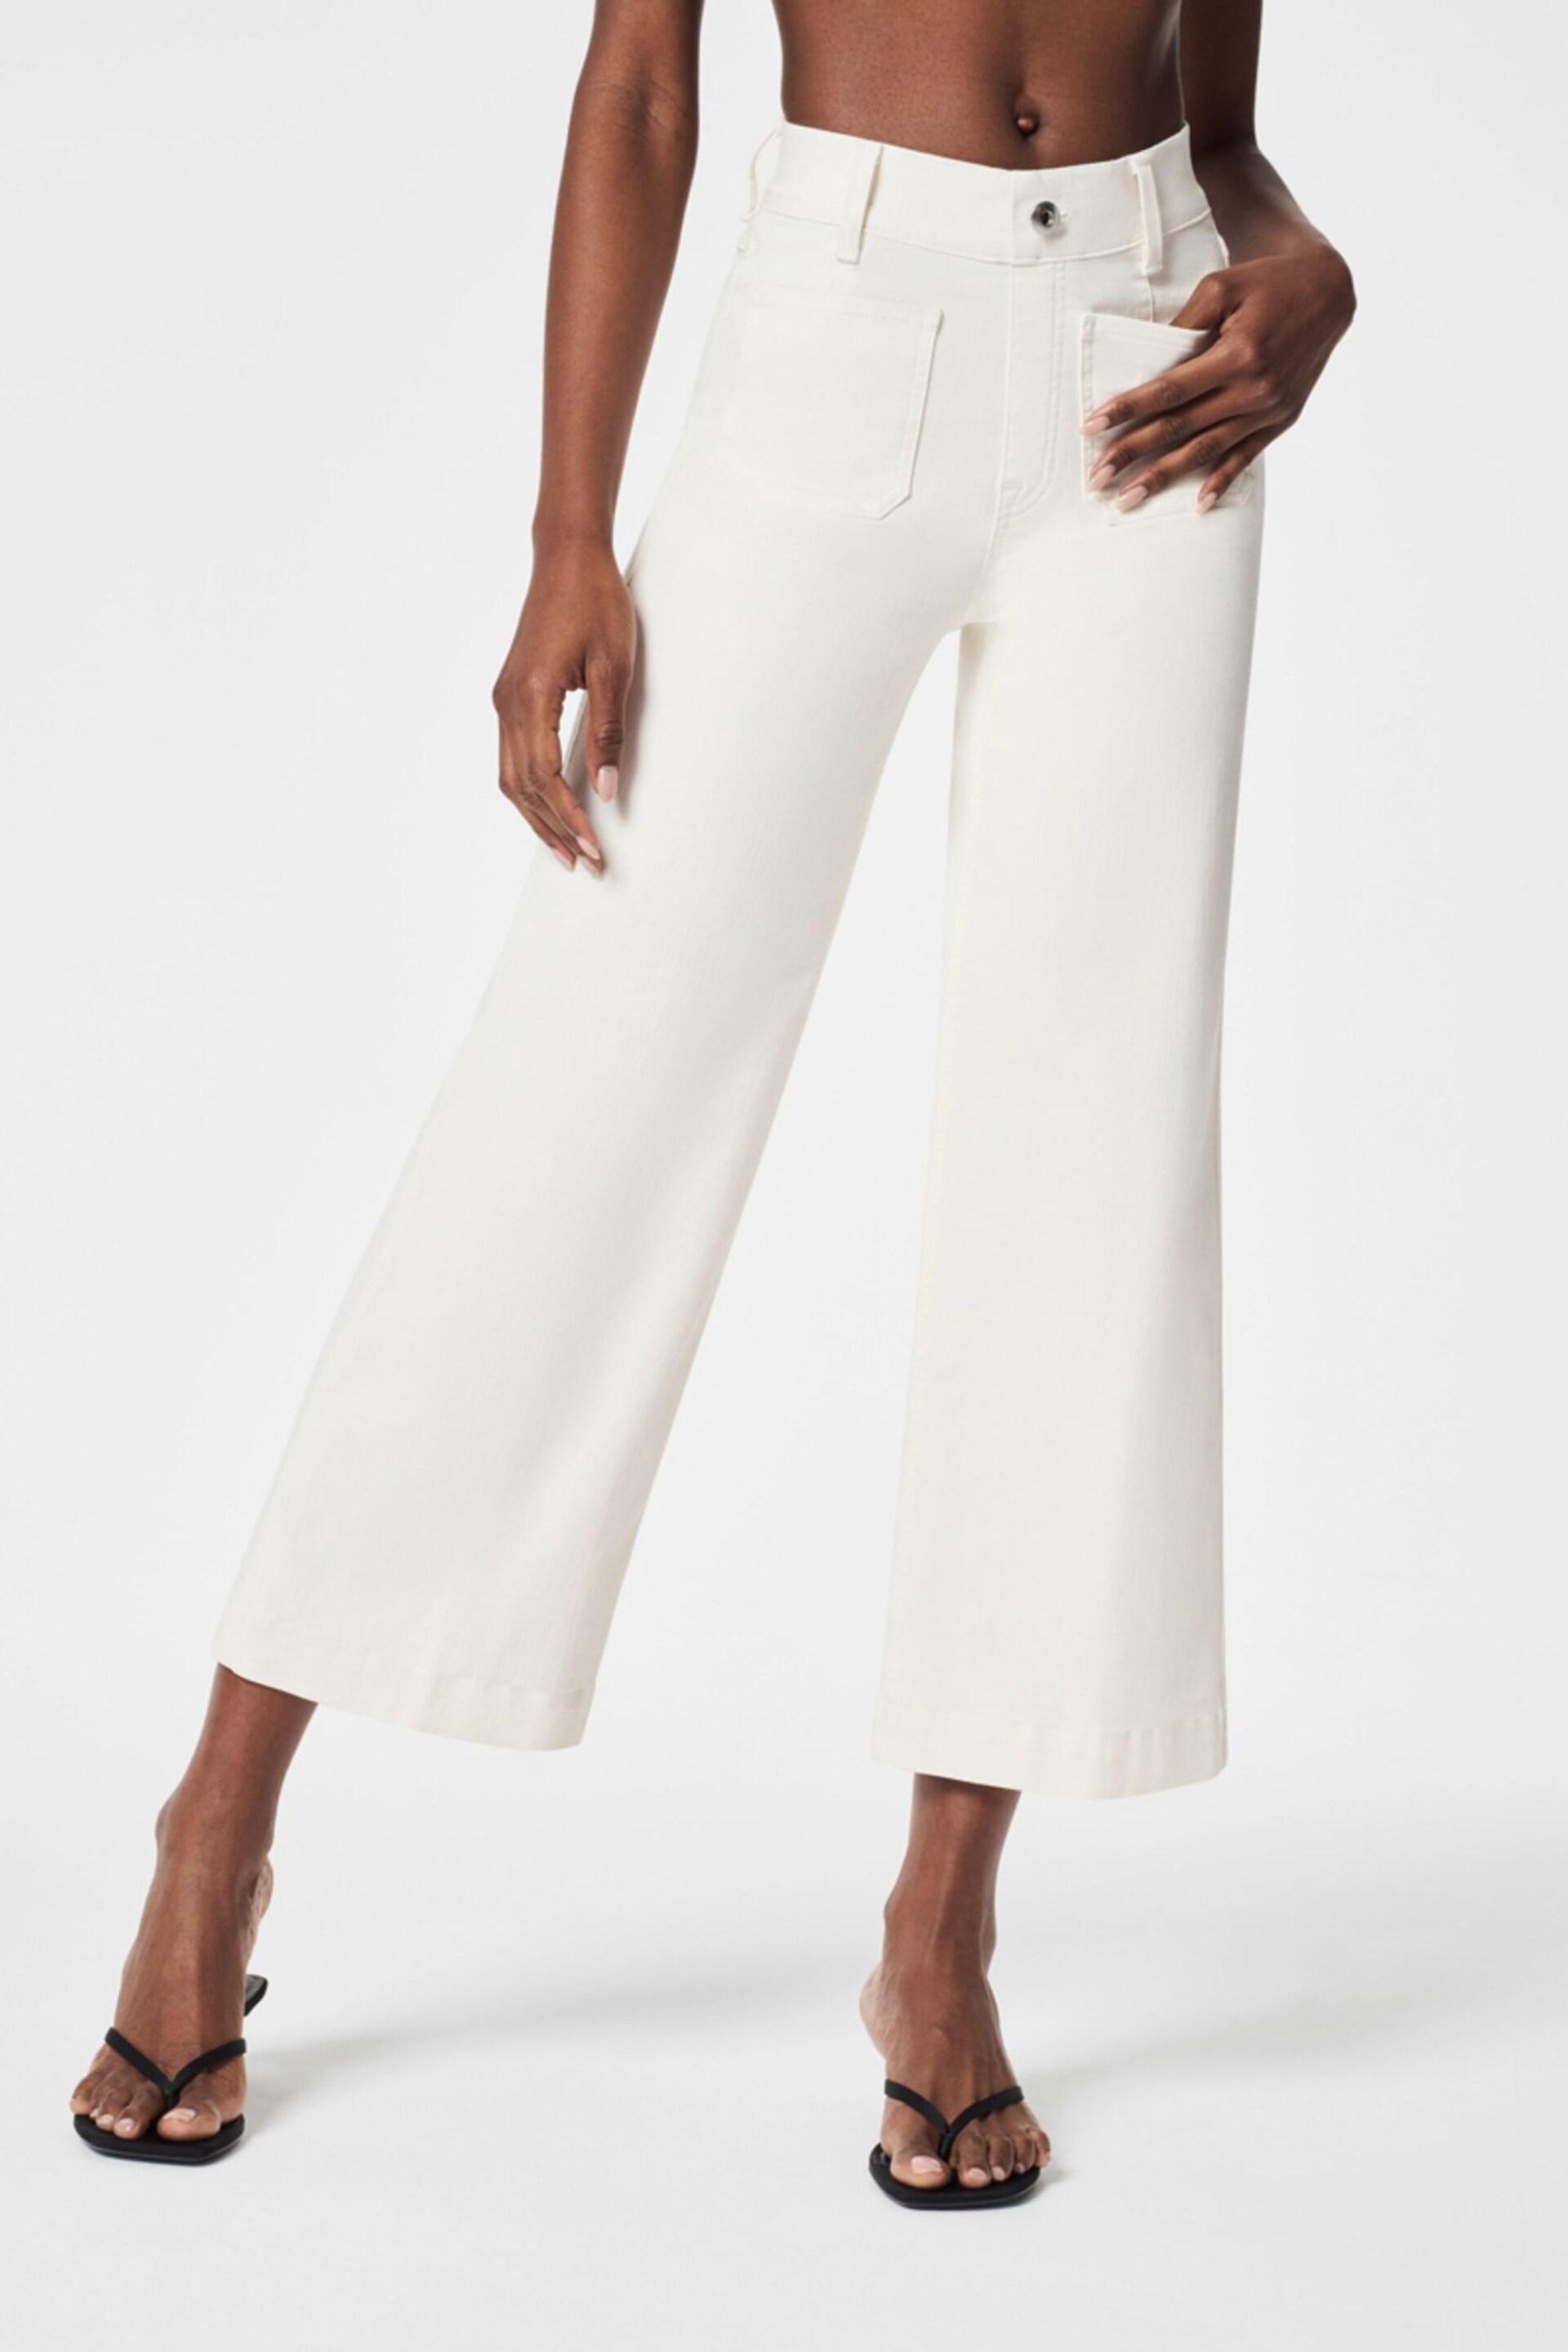 SPANX Cropped Raw Hem Wide Leg White Jeans - Image 3 of 5